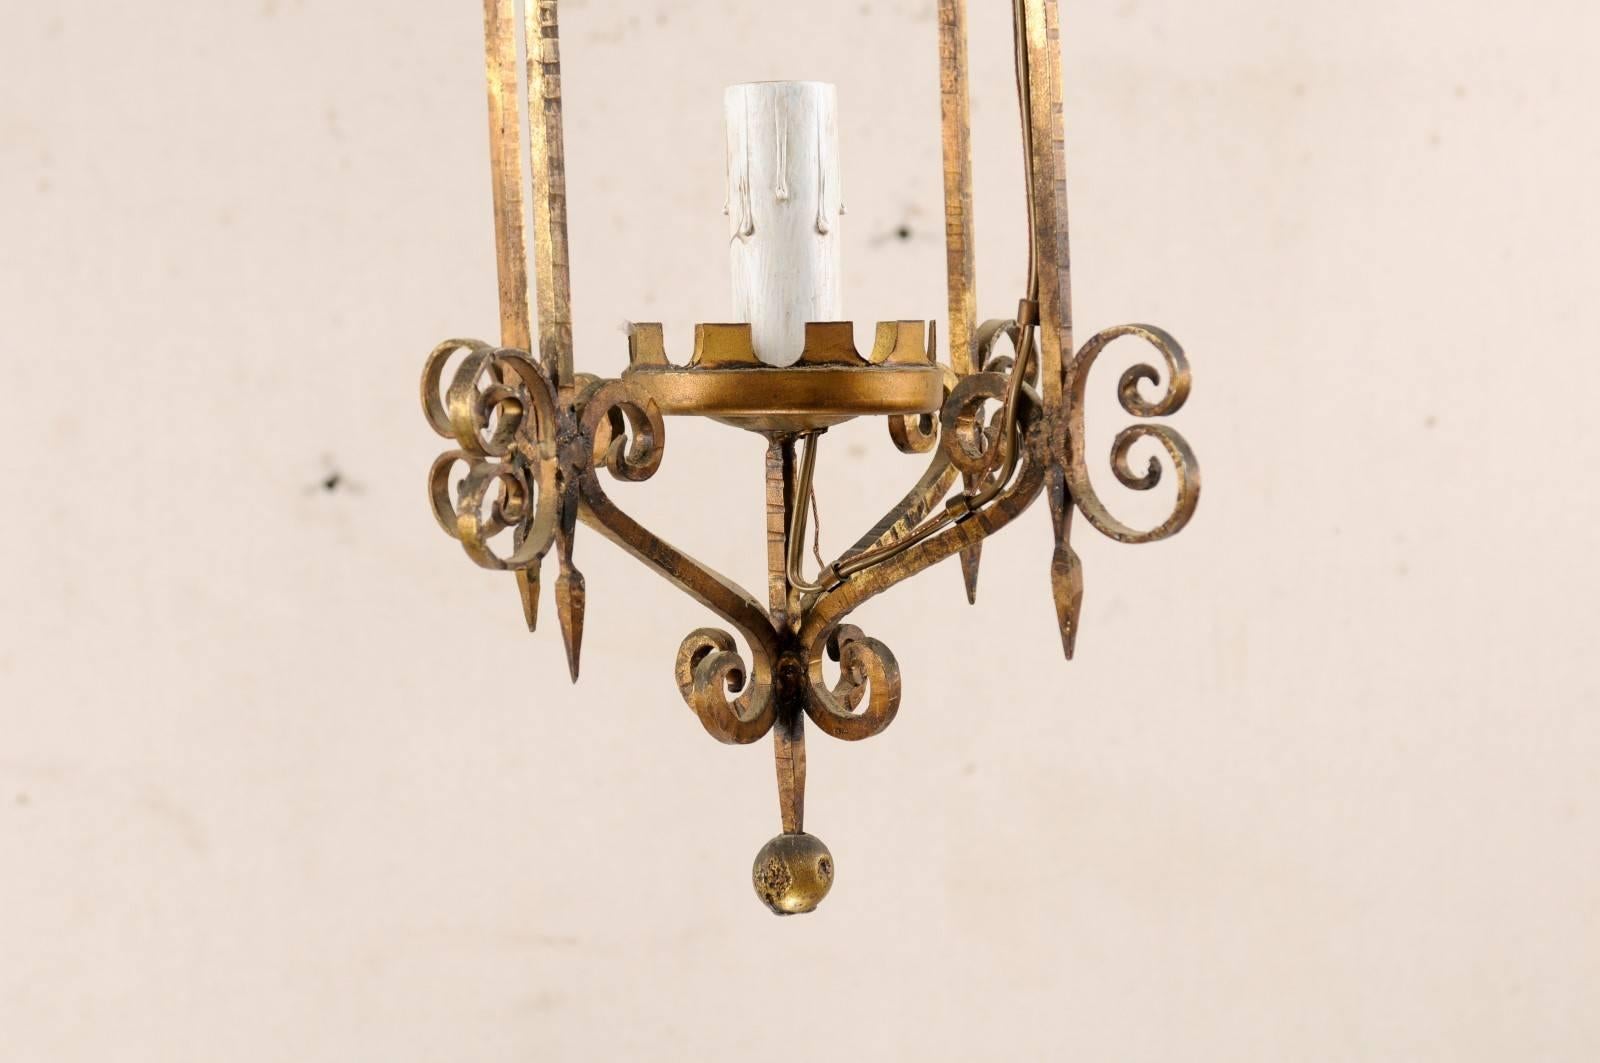 French Mid-20th Century Single Light Scrolled Iron Chandelier in Gold Bronze Hue For Sale 3